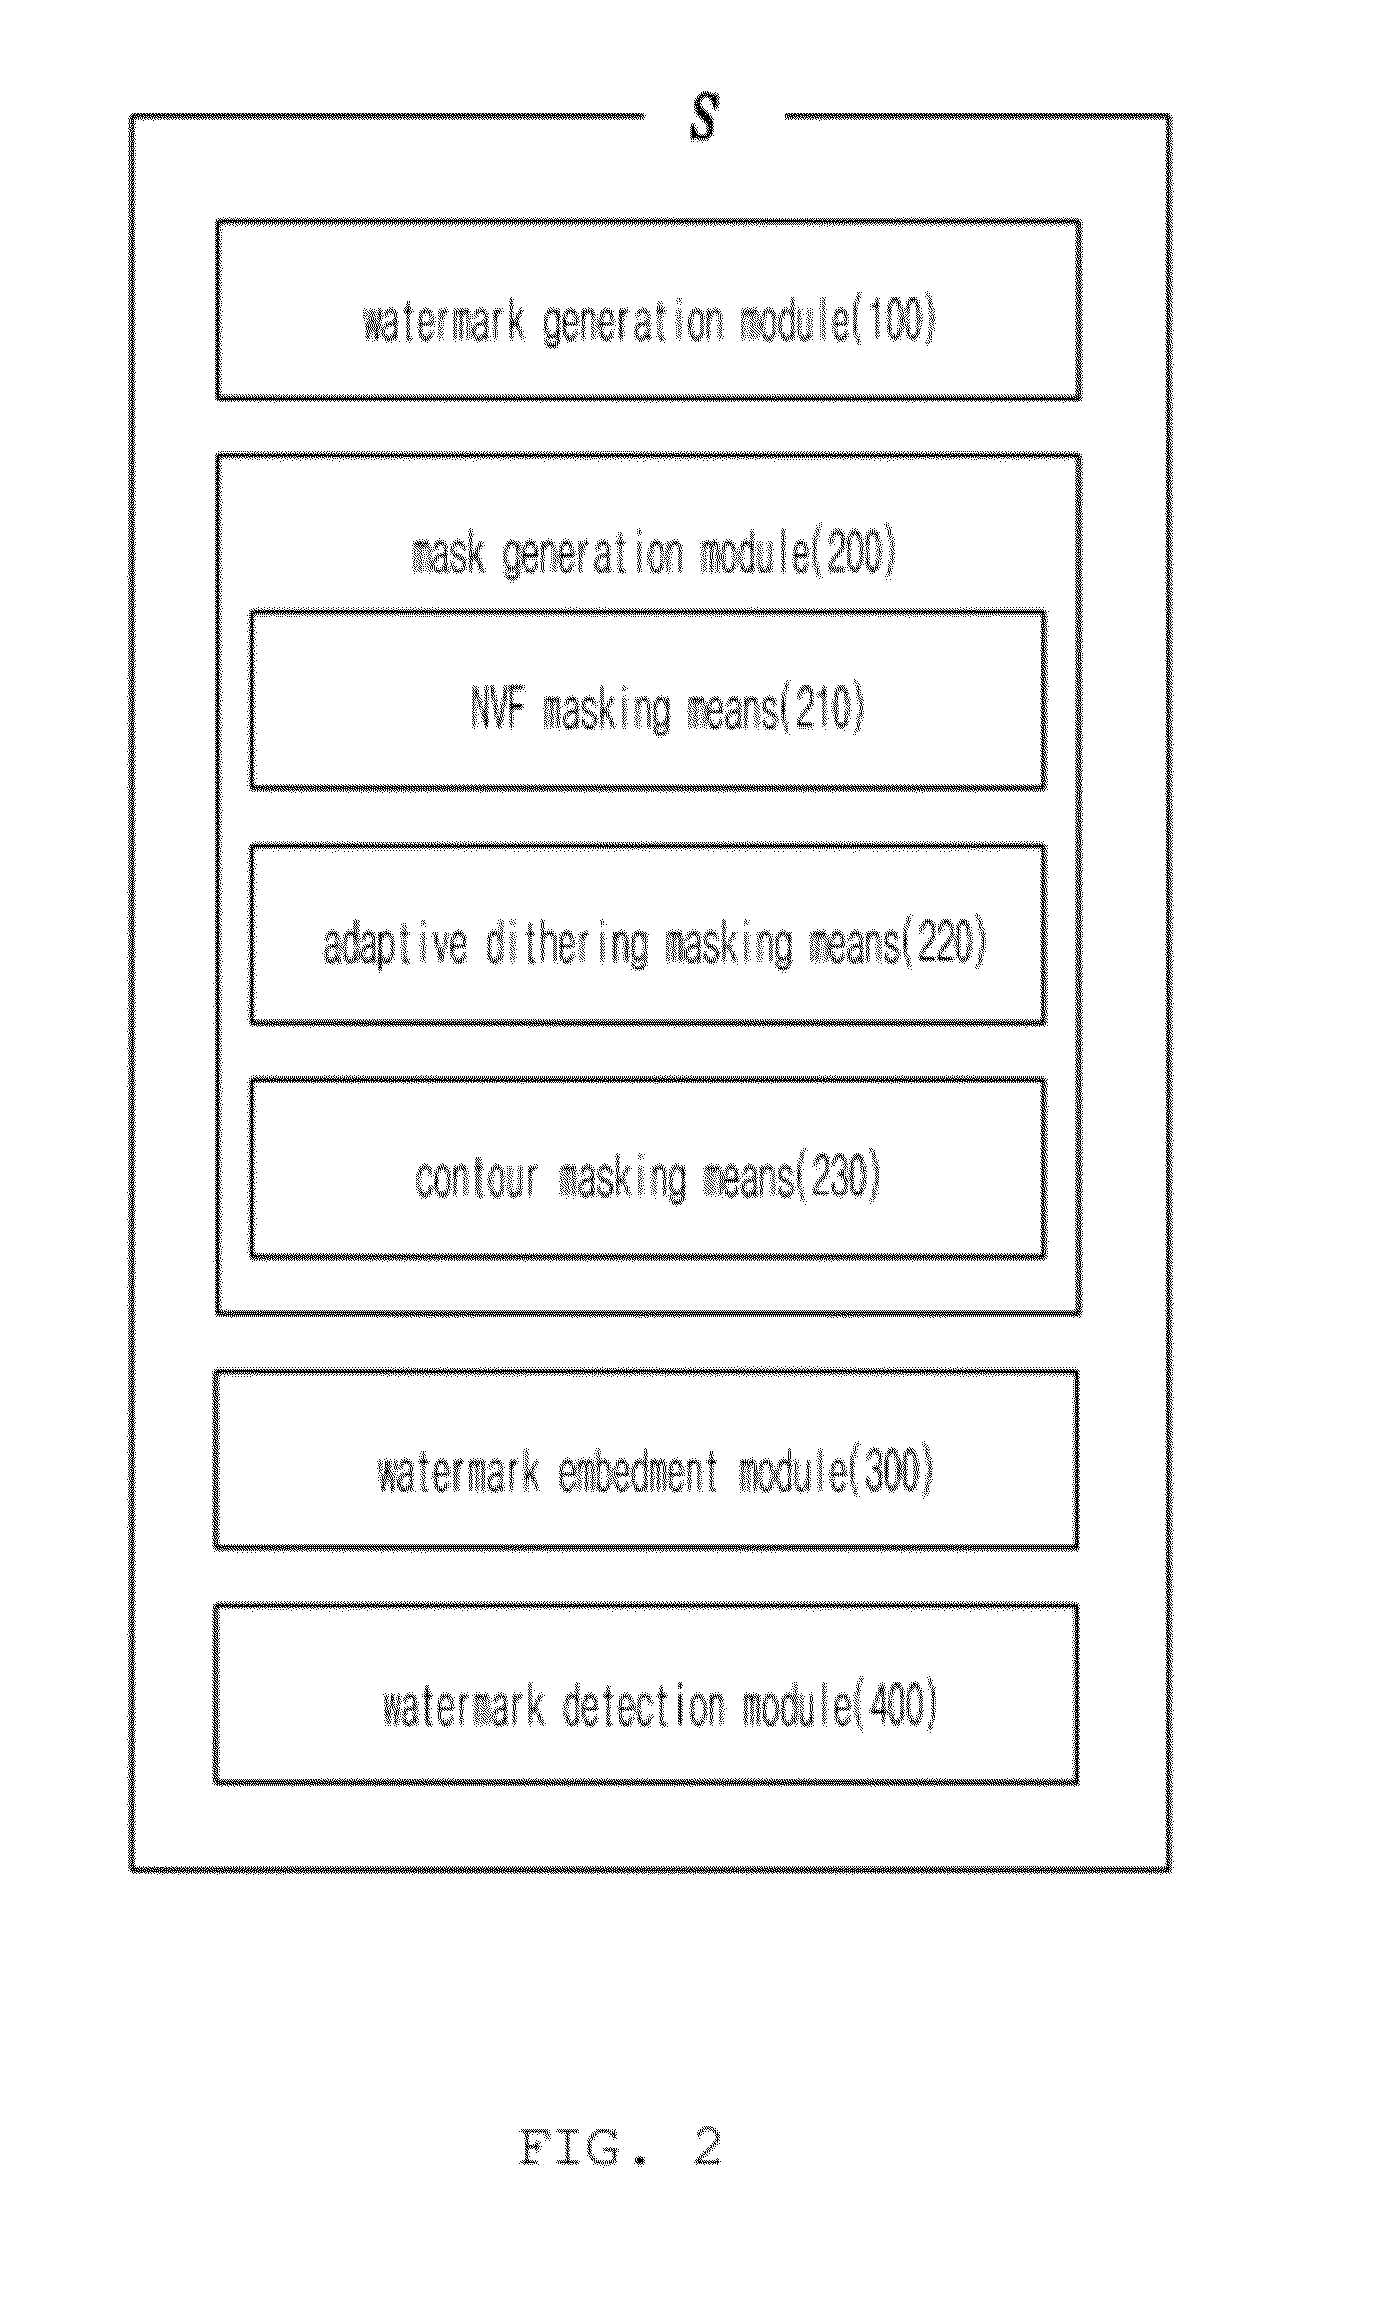 Composite masking system and method for improving invisibility of high-definition video watermarking